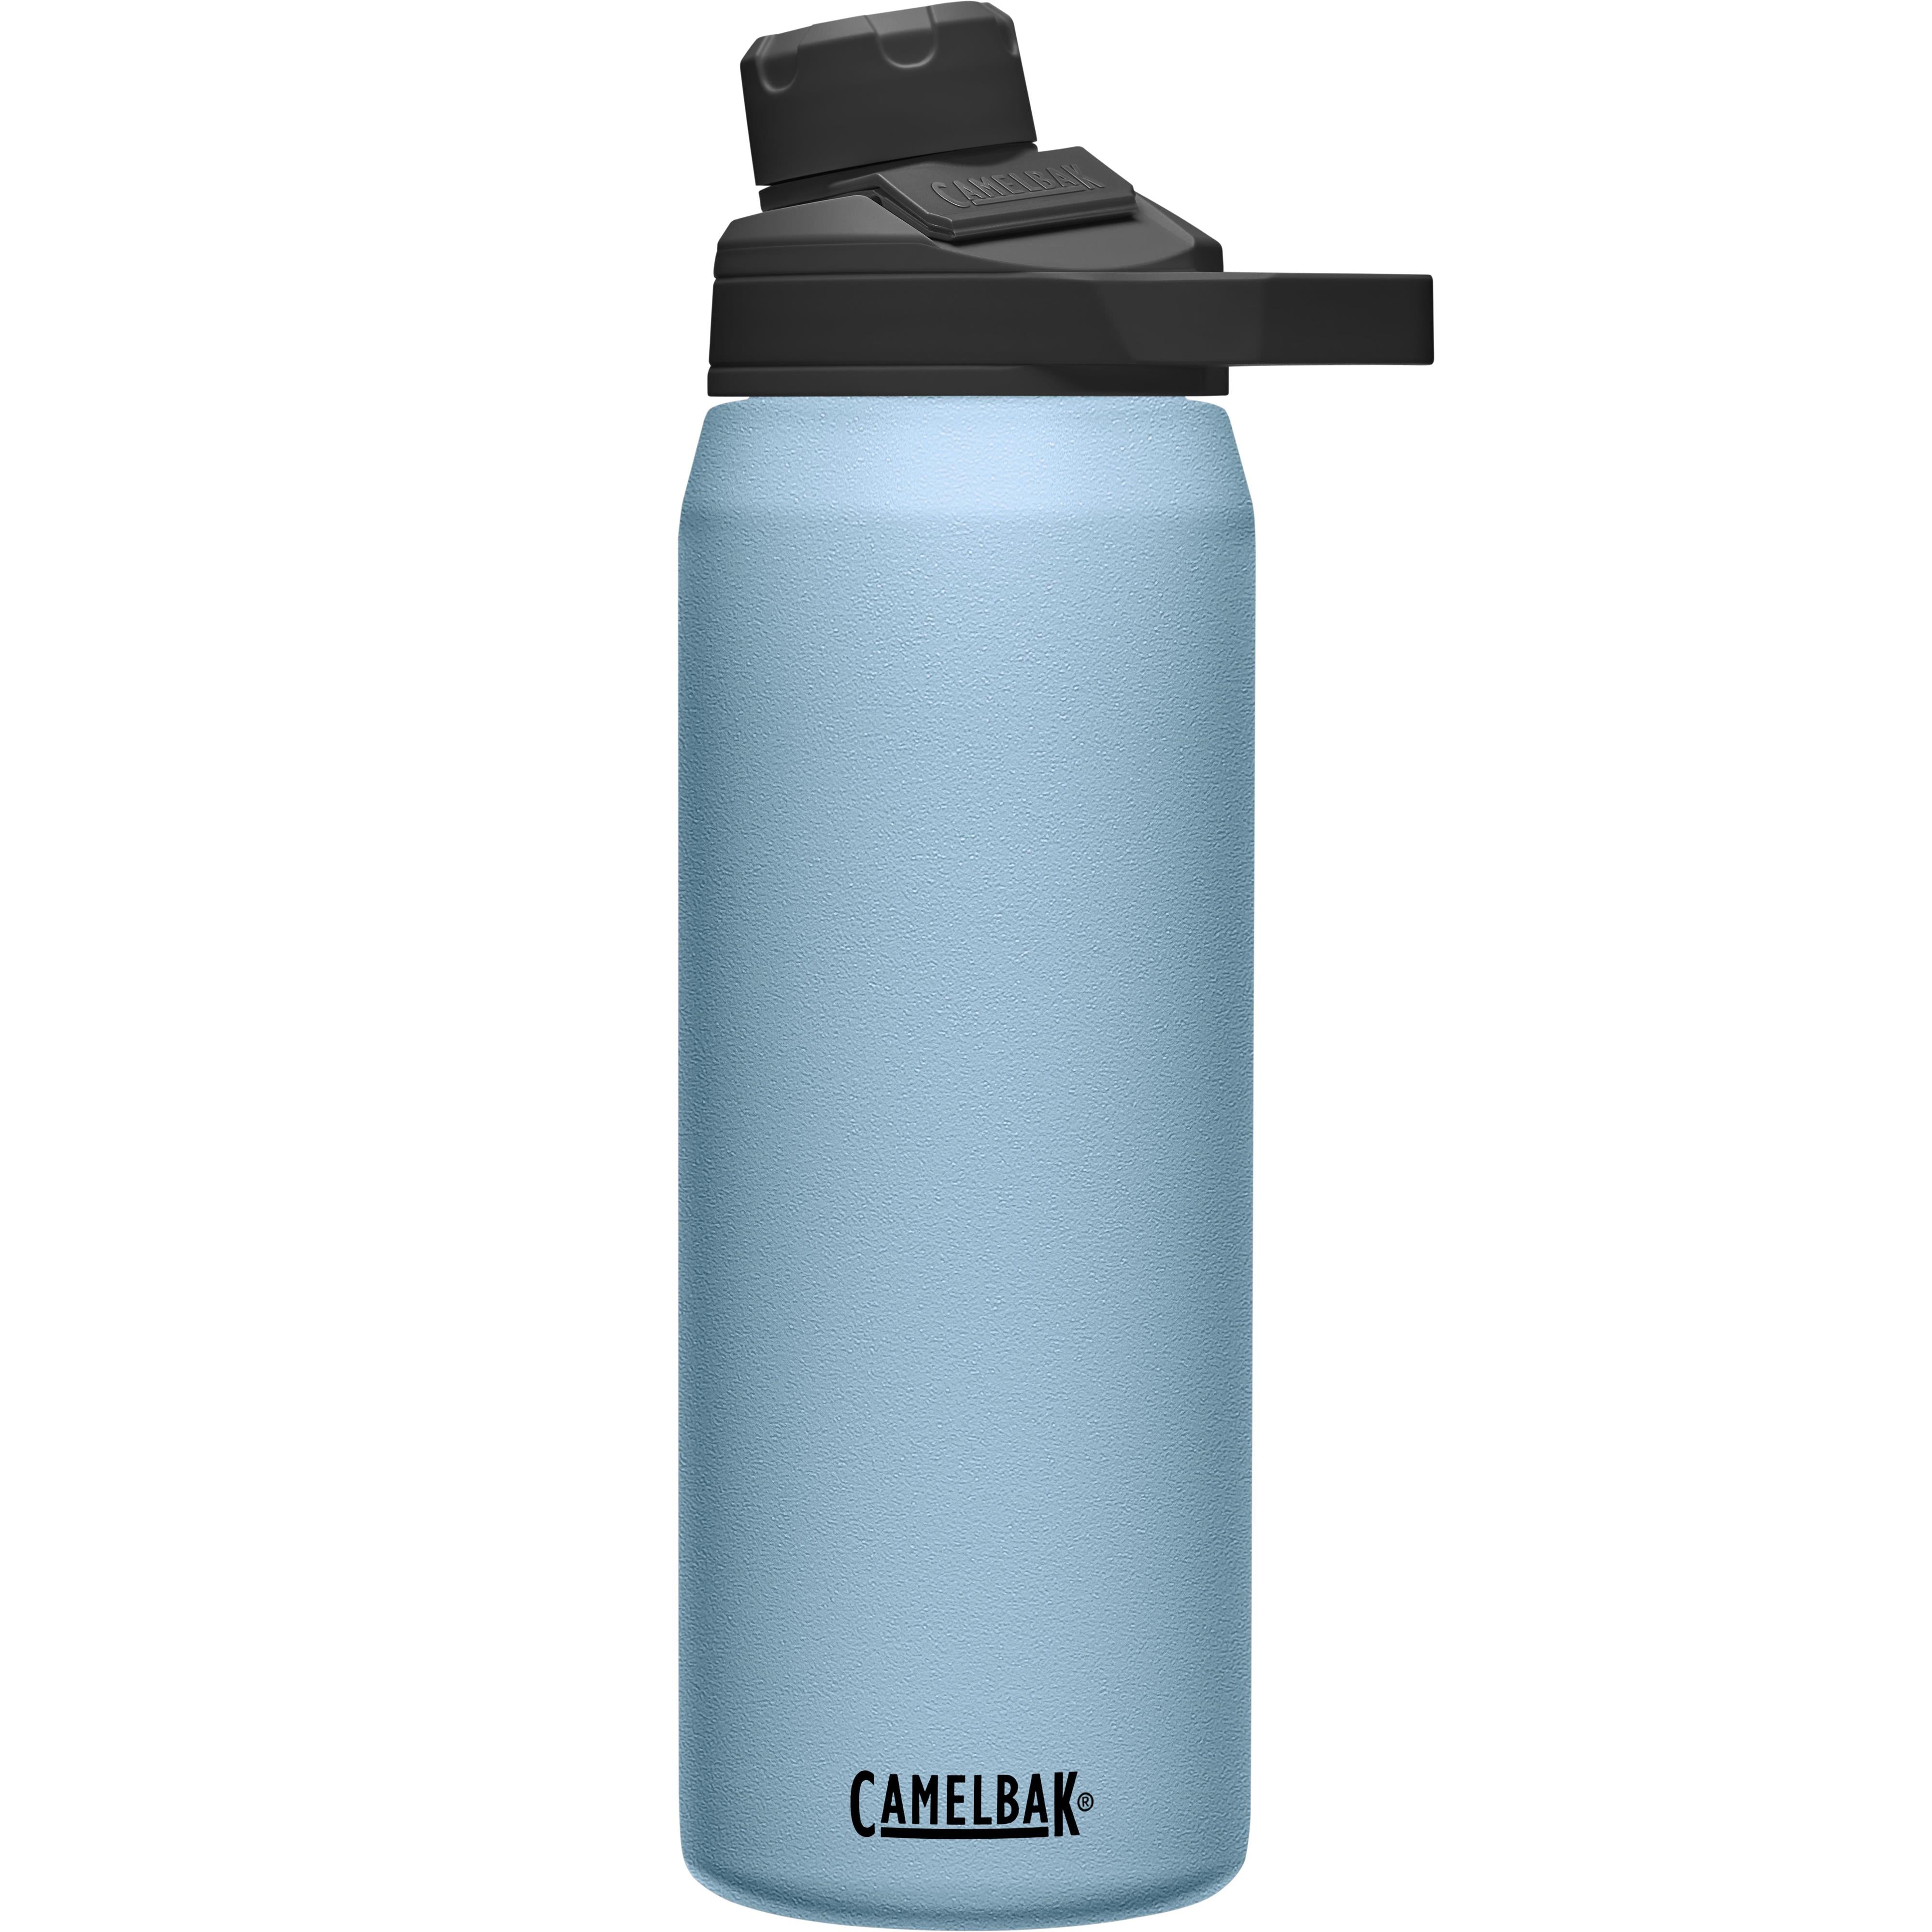 CamelBak Chute Mag 25oz Vacuum Insulated Stainless Steel Water Bottle